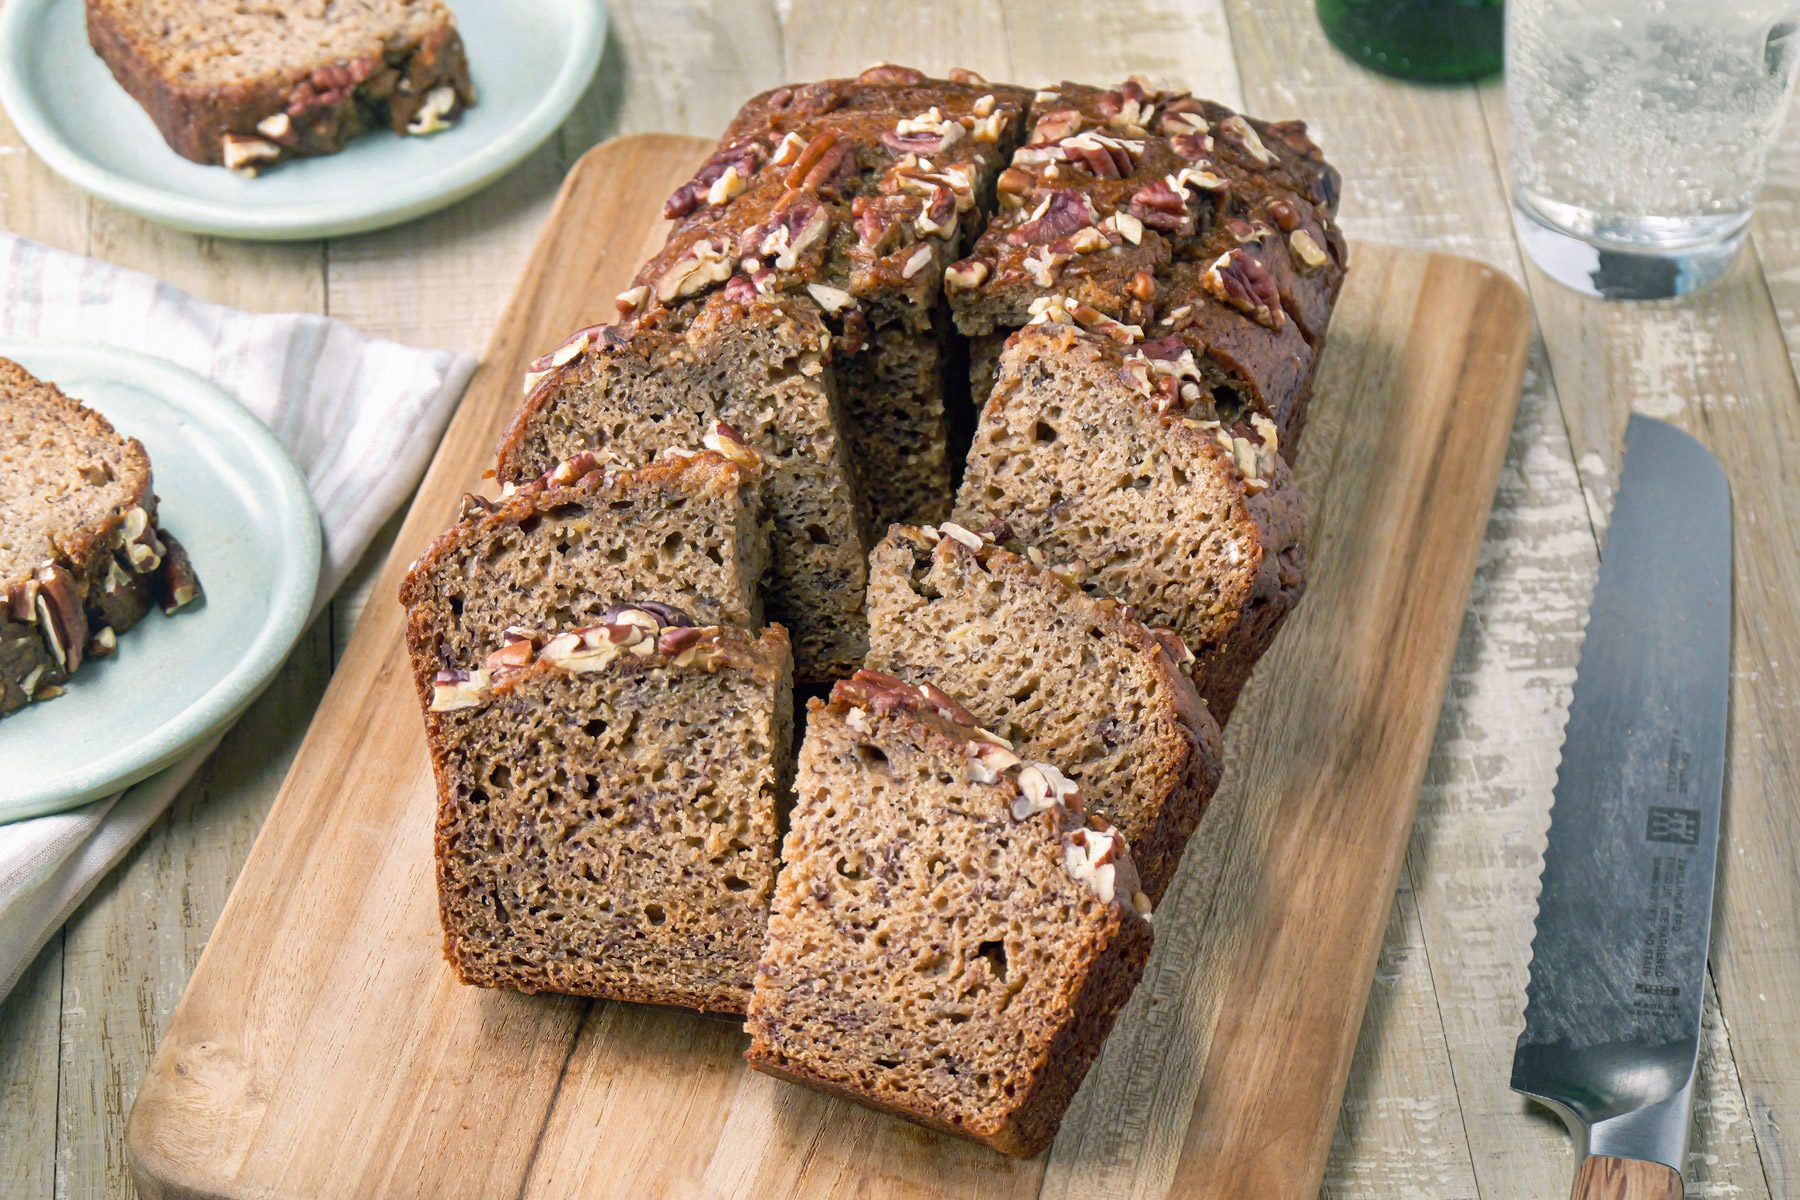 A loaf of Banana Nut Bread on a wooden board.